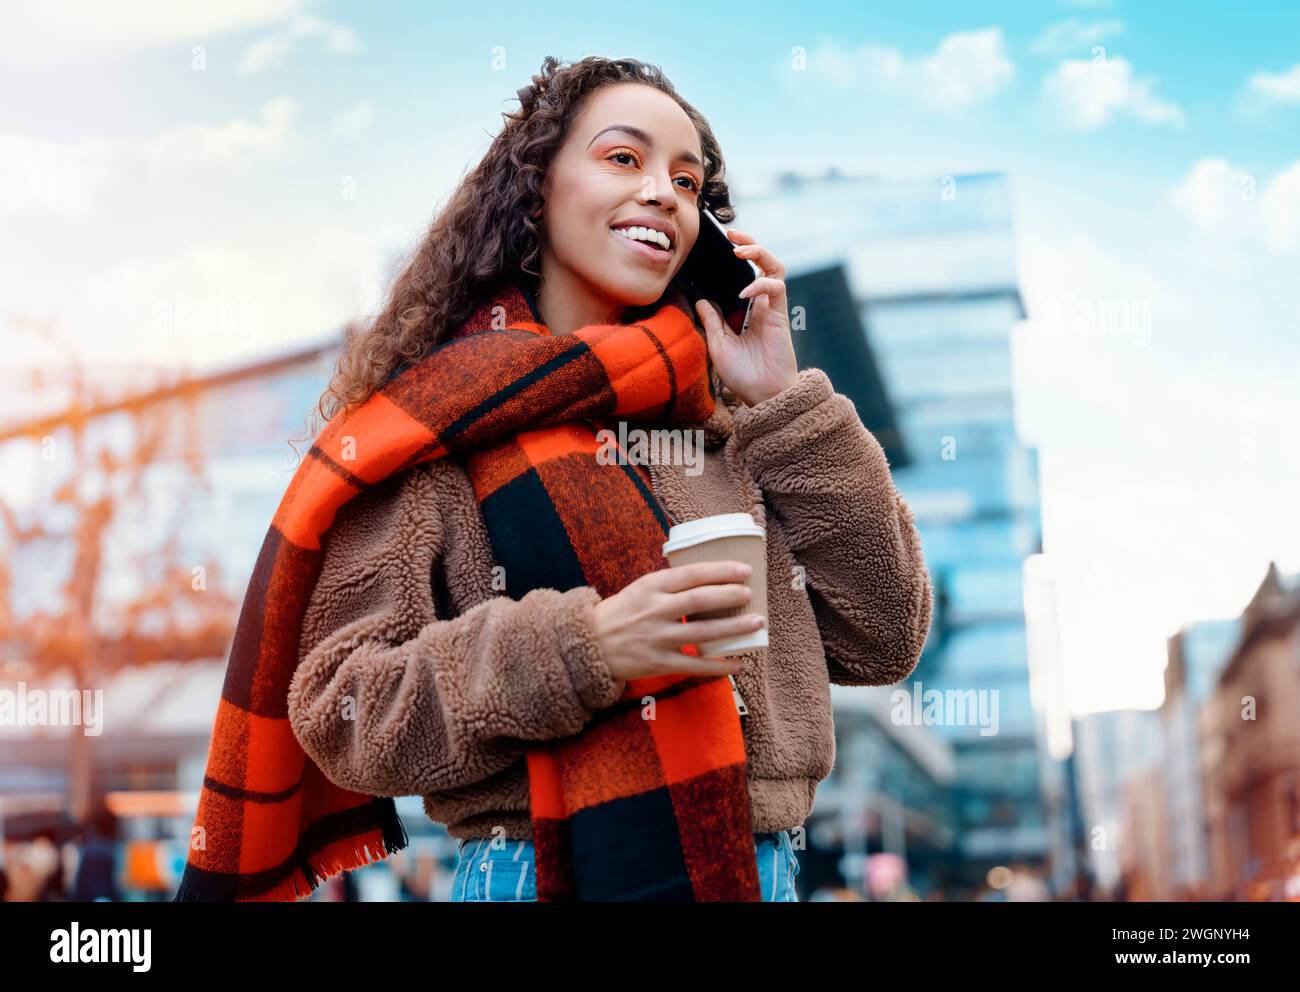 Outdoor portrait of a happy  woman using a mobile phone and drinking coffee in a Europe city Stock Photo